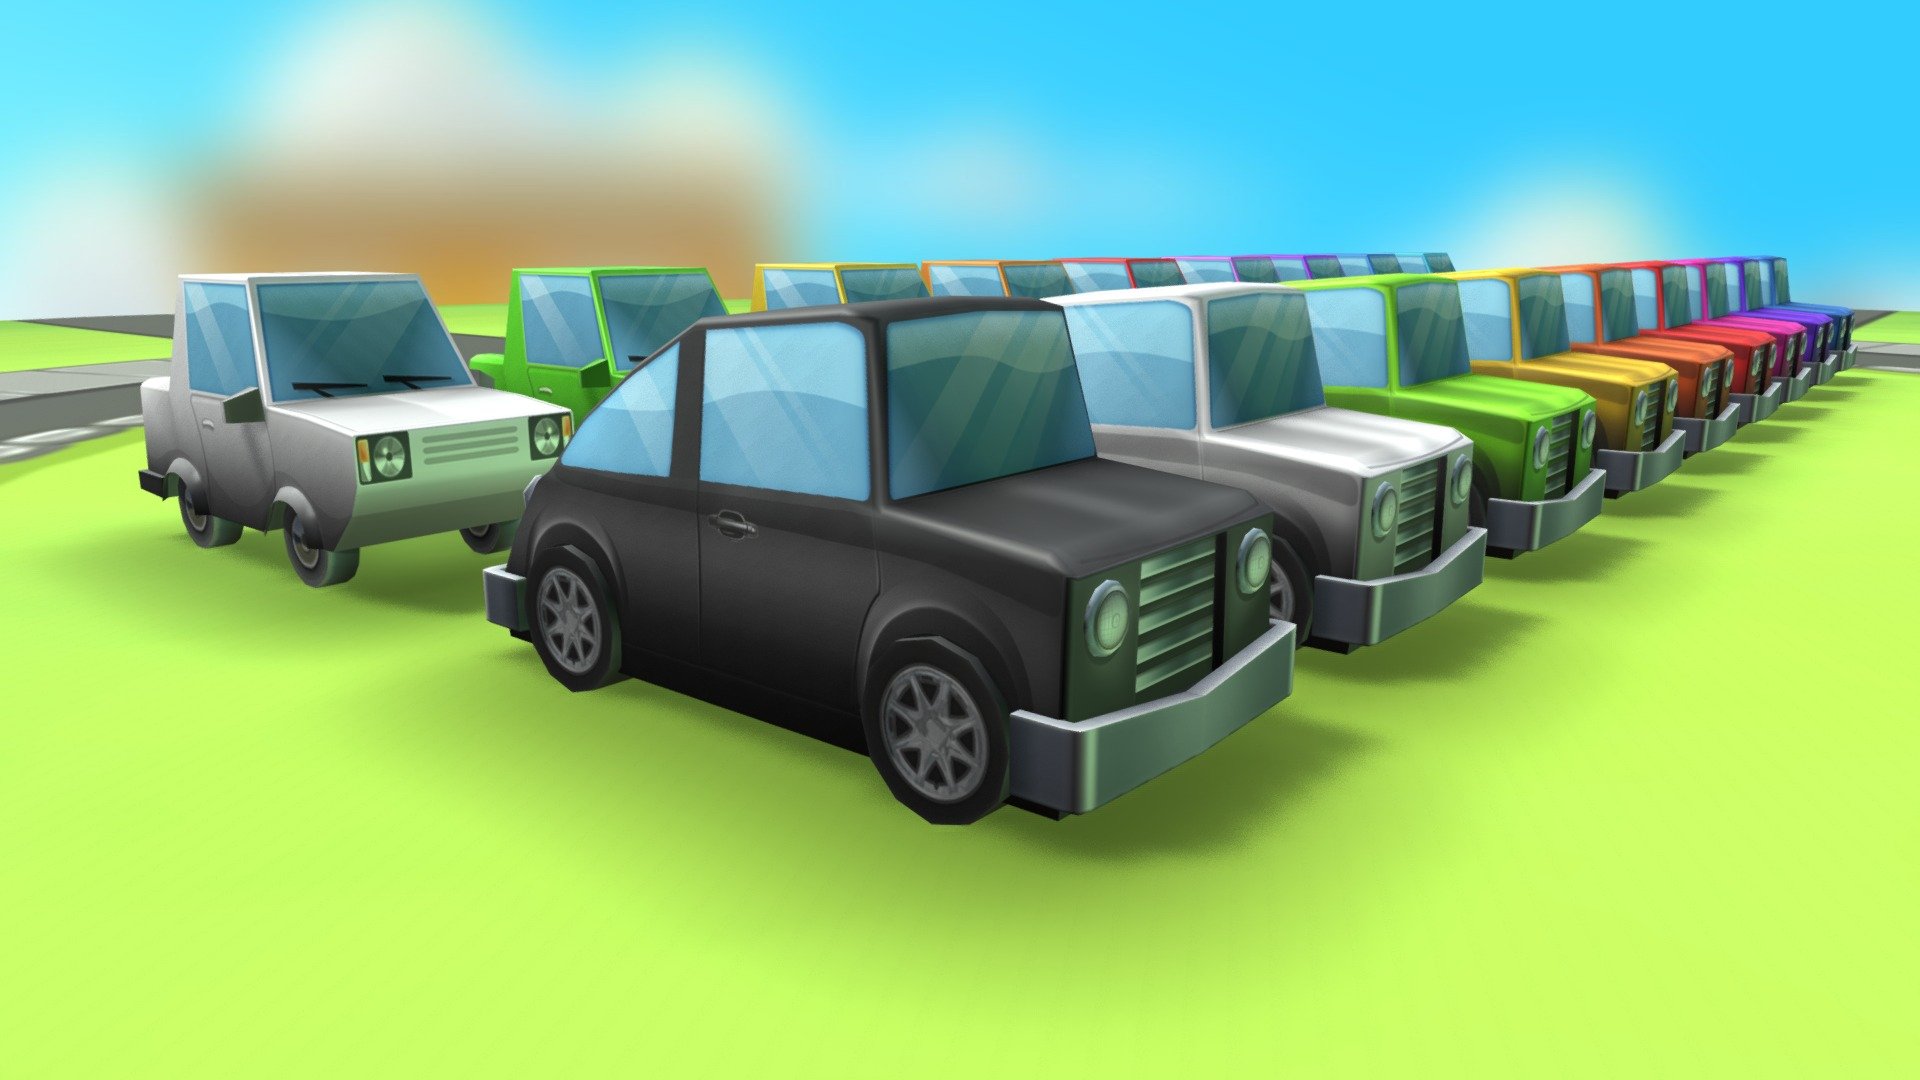 Two Low Polygonal Toon Cars.

Square Car - 939 Triangles
Rounded Car - 514 Triangles
Each Car has 1 Albedo/Color map 1024x1024 - LOW POLY - Toon Cars - Buy Royalty Free 3D model by Neberkenezer 3d model